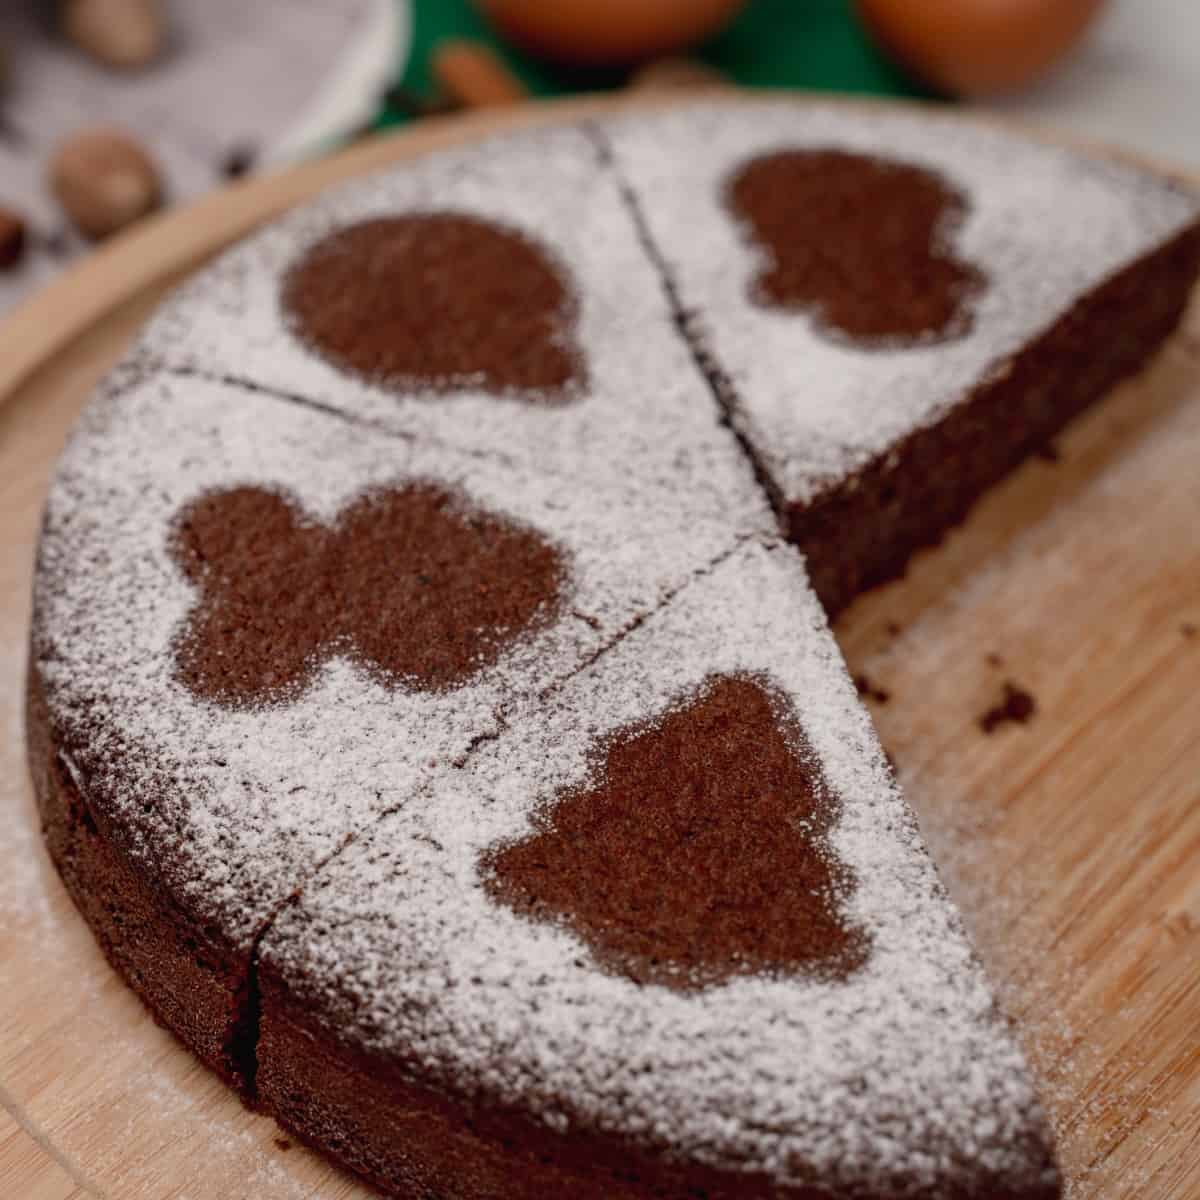 A round keto gingerbread cake dusted with powdered erythritol, where few slices are missing.